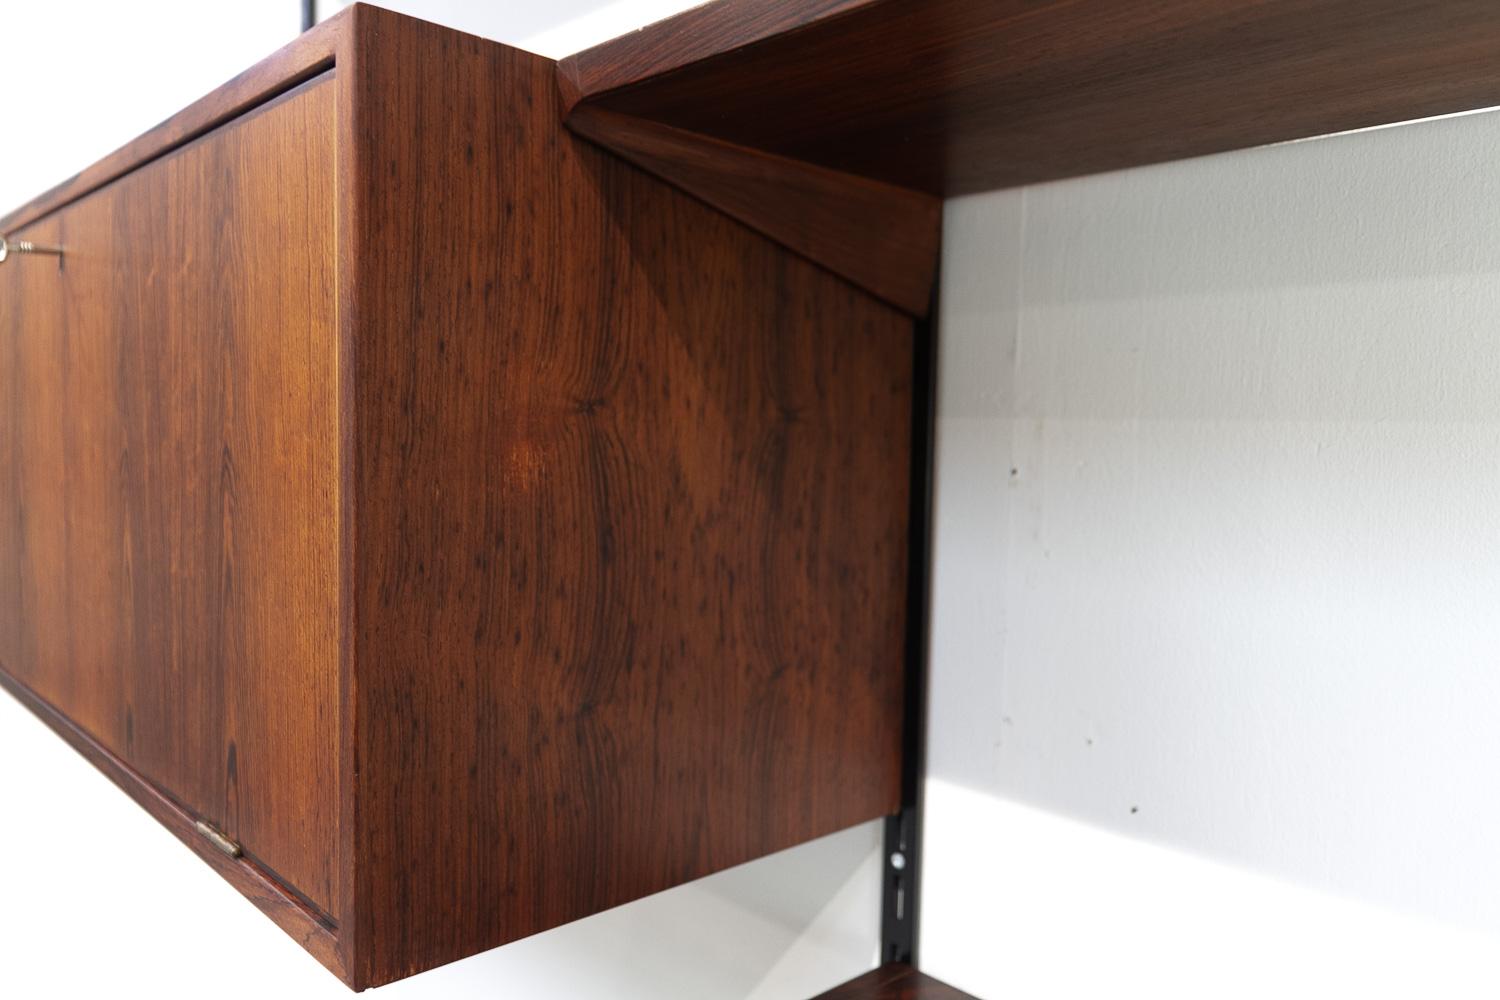 Danish Modern Rosewood 3-Bay Wall Unit by Kai Kristiansen for FM, 1960s For Sale 2